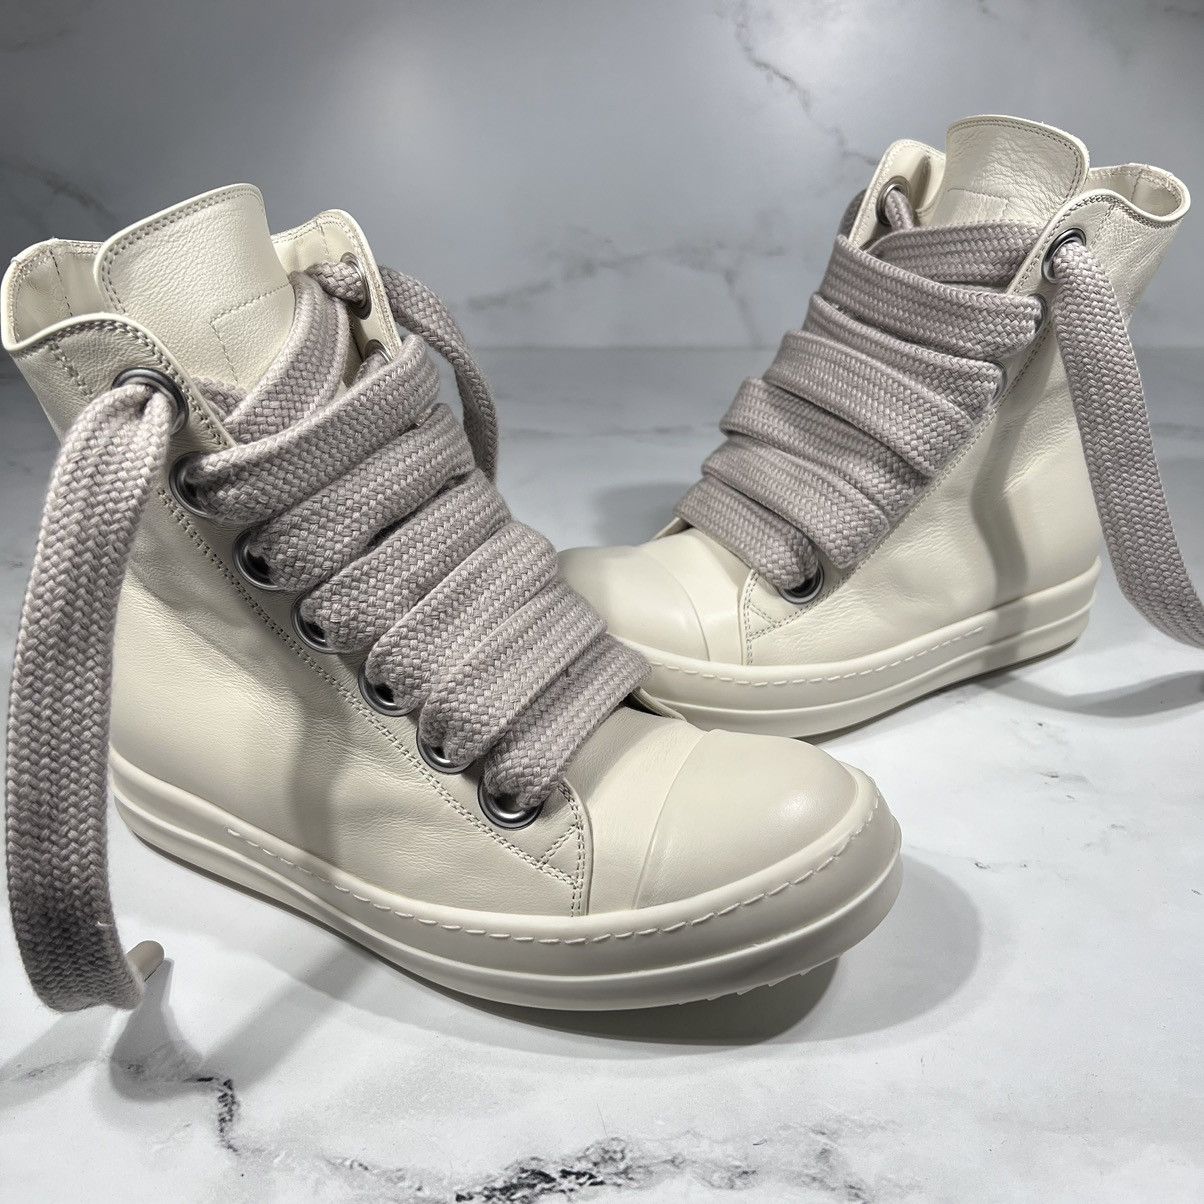 Rick Owens Rick Owens Ramones Milk Leather Thick Lace High Top Sneakers Size US 7 / IT 37 - 4 Thumbnail